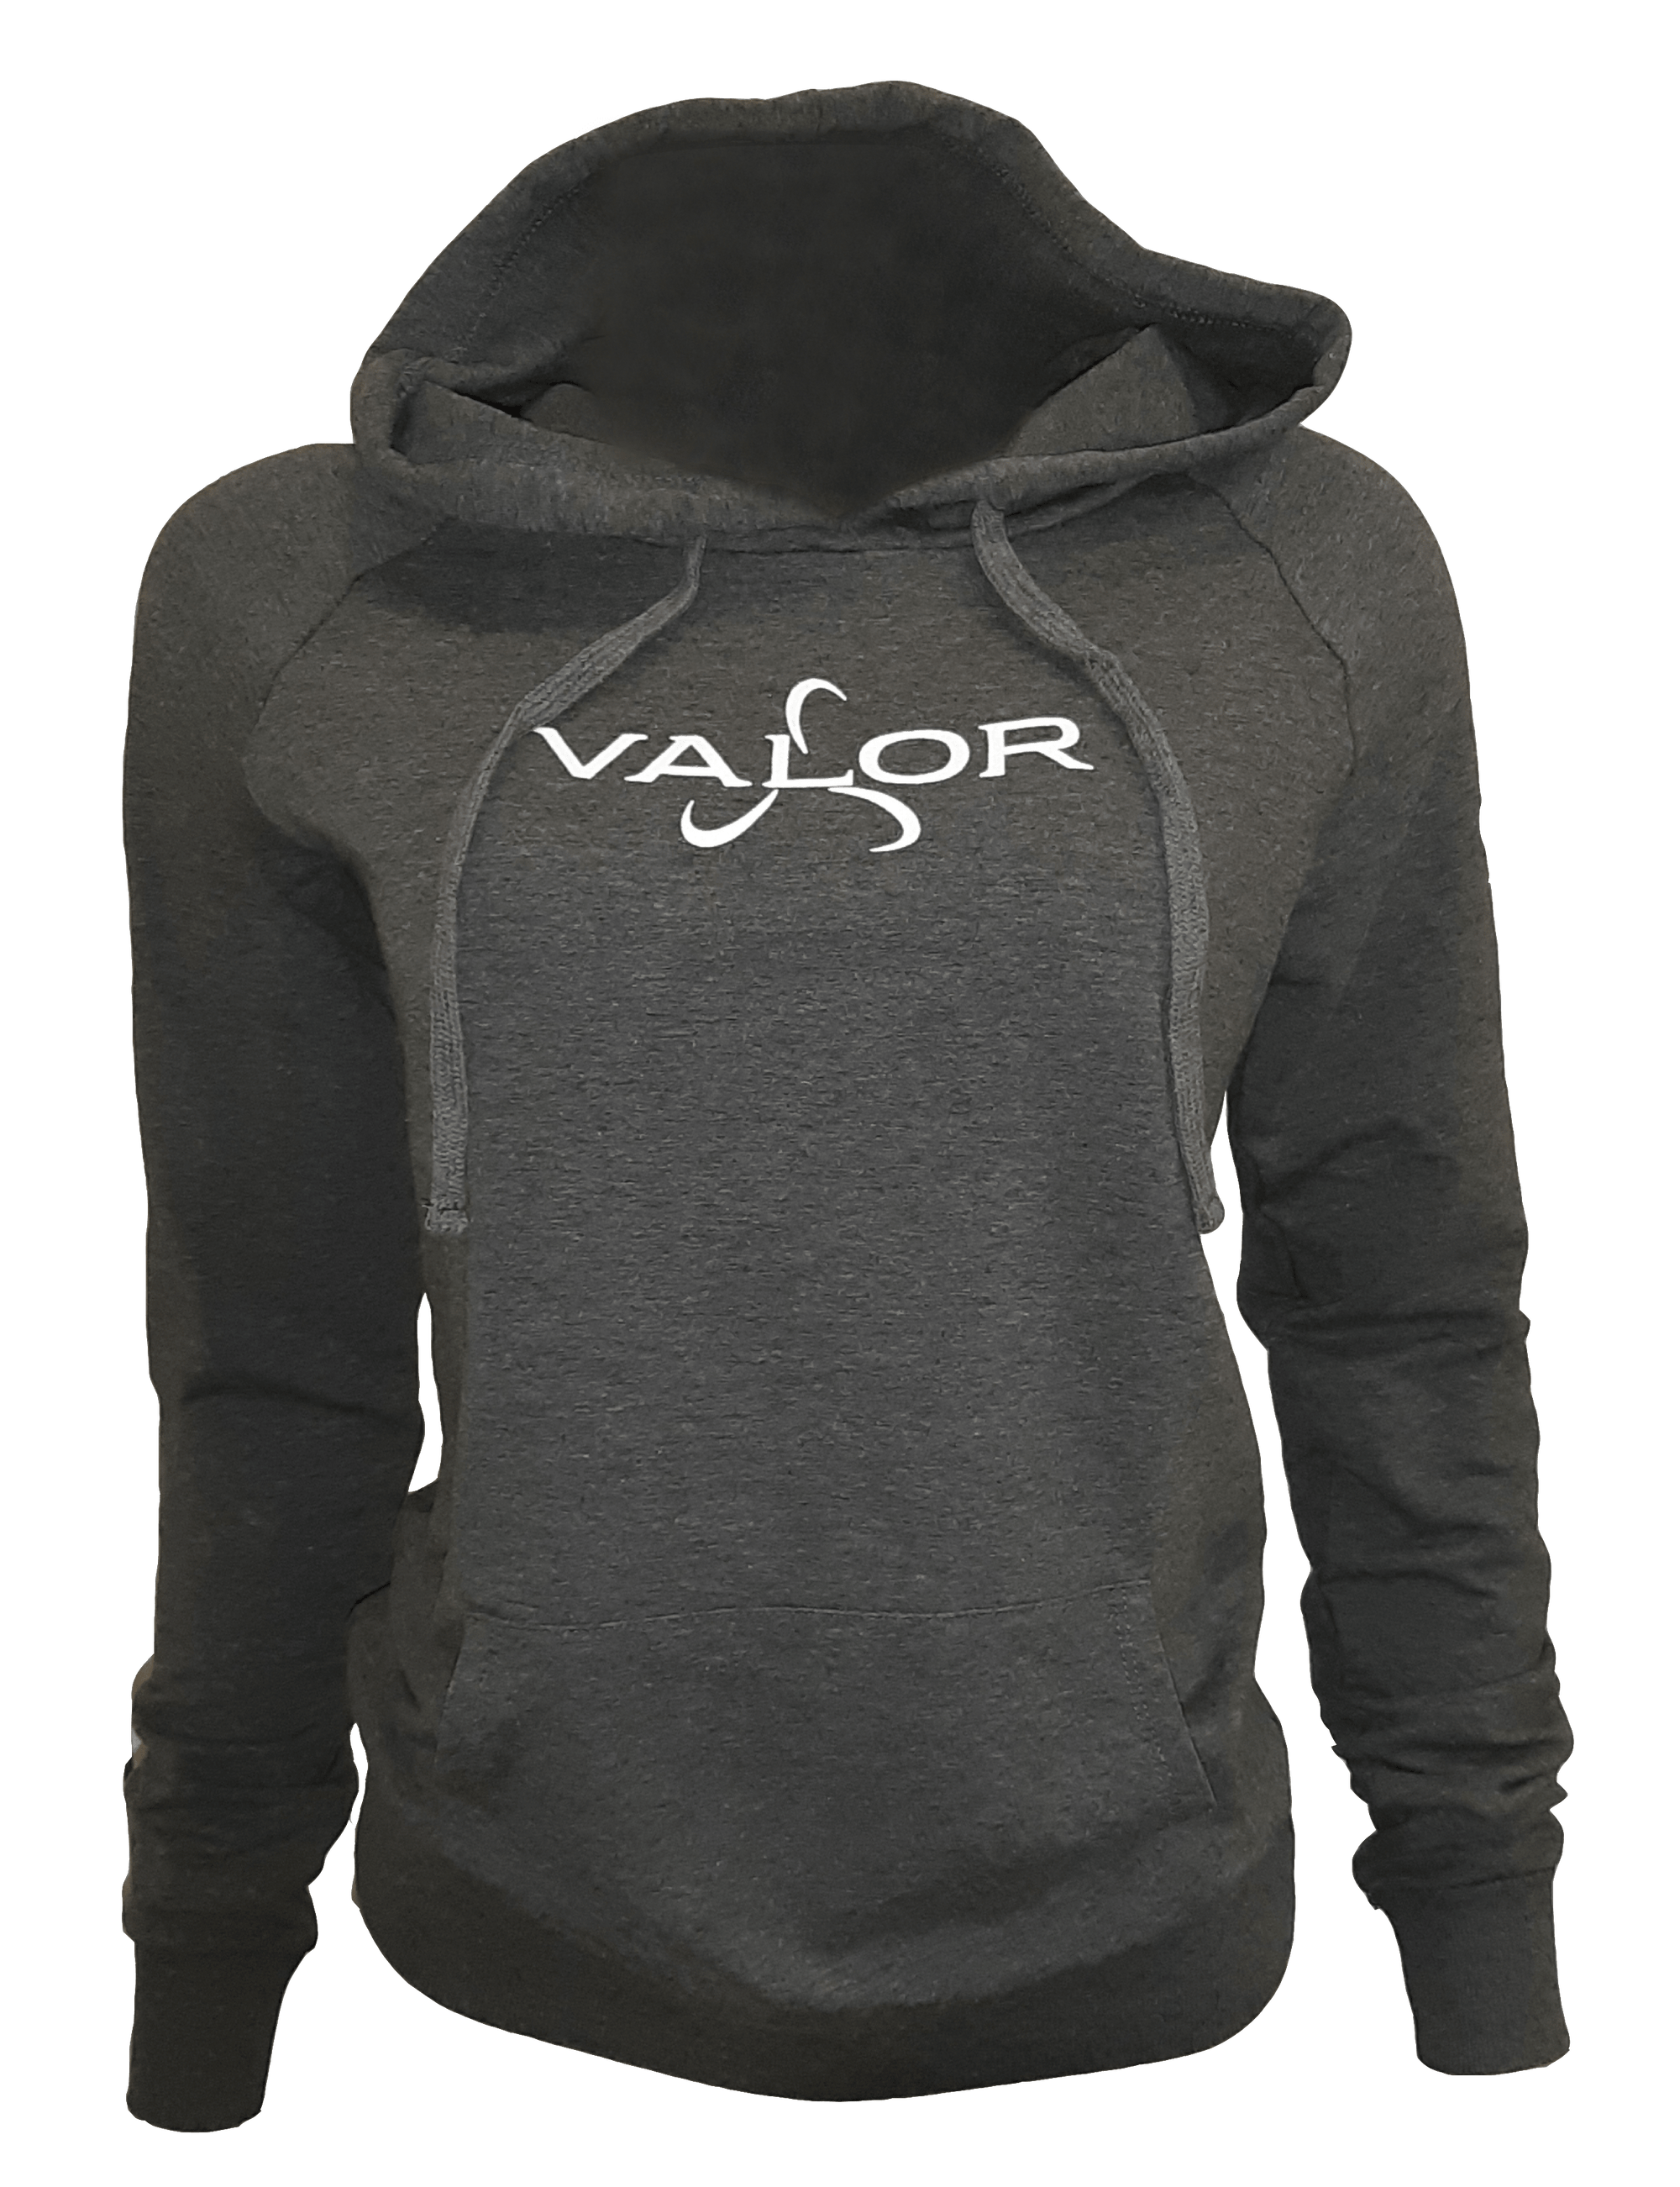 VALOR YOUTH HOODIE 